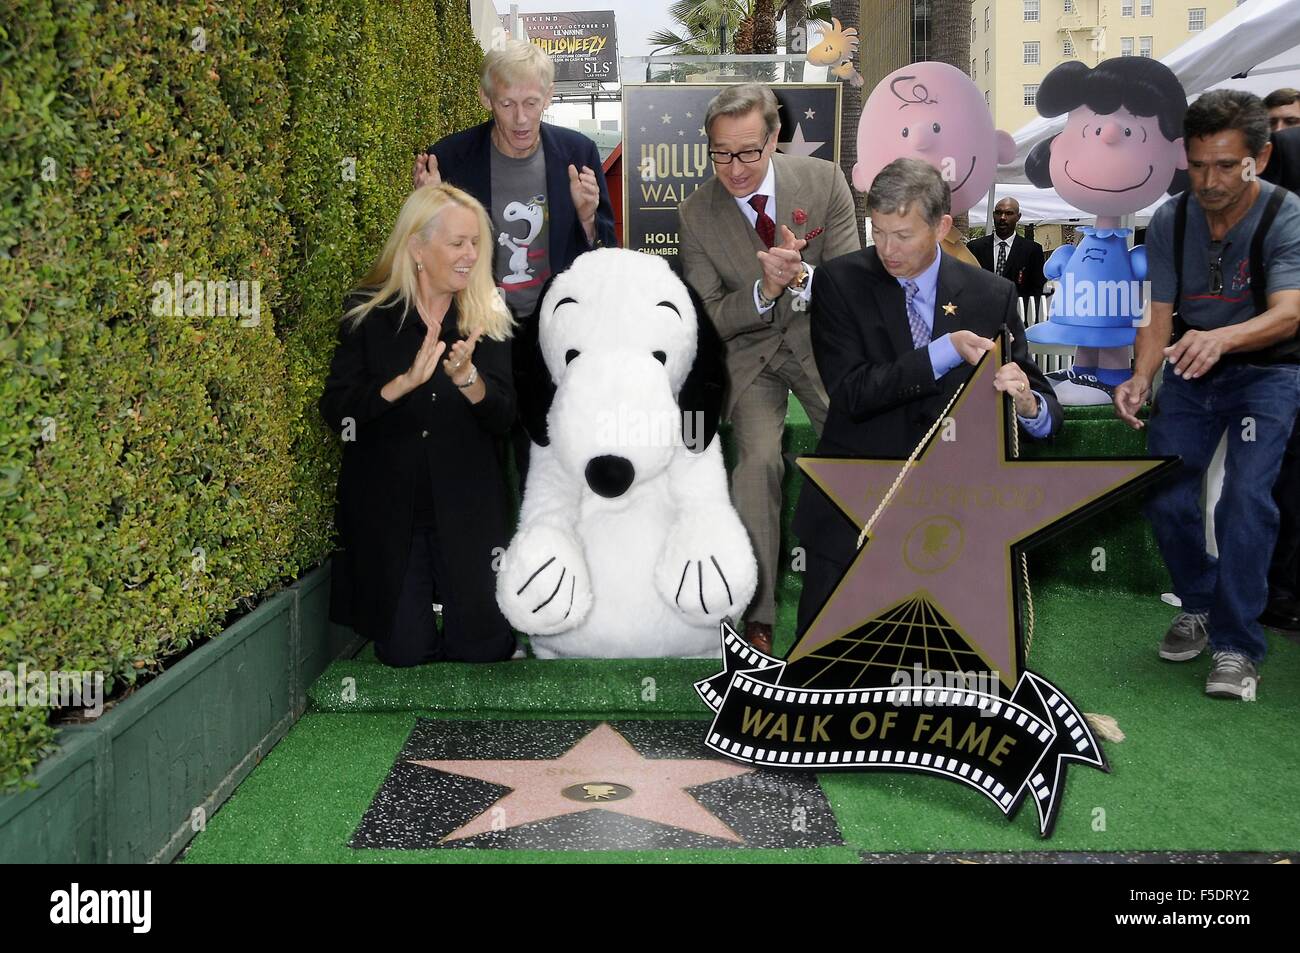 Los Angeles, CA, USA. 2nd Nov, 2015. Beth Marlis, Craig Schultz, Snoopy, Paul Feig, Leron Gubler at the induction ceremony for Star on the Hollywood Walk of Fame for Snoopy, Hollywood Boulevard, Los Angeles, CA November 2, 2015. Credit:  Michael Germana/Everett Collection/Alamy Live News Stock Photo